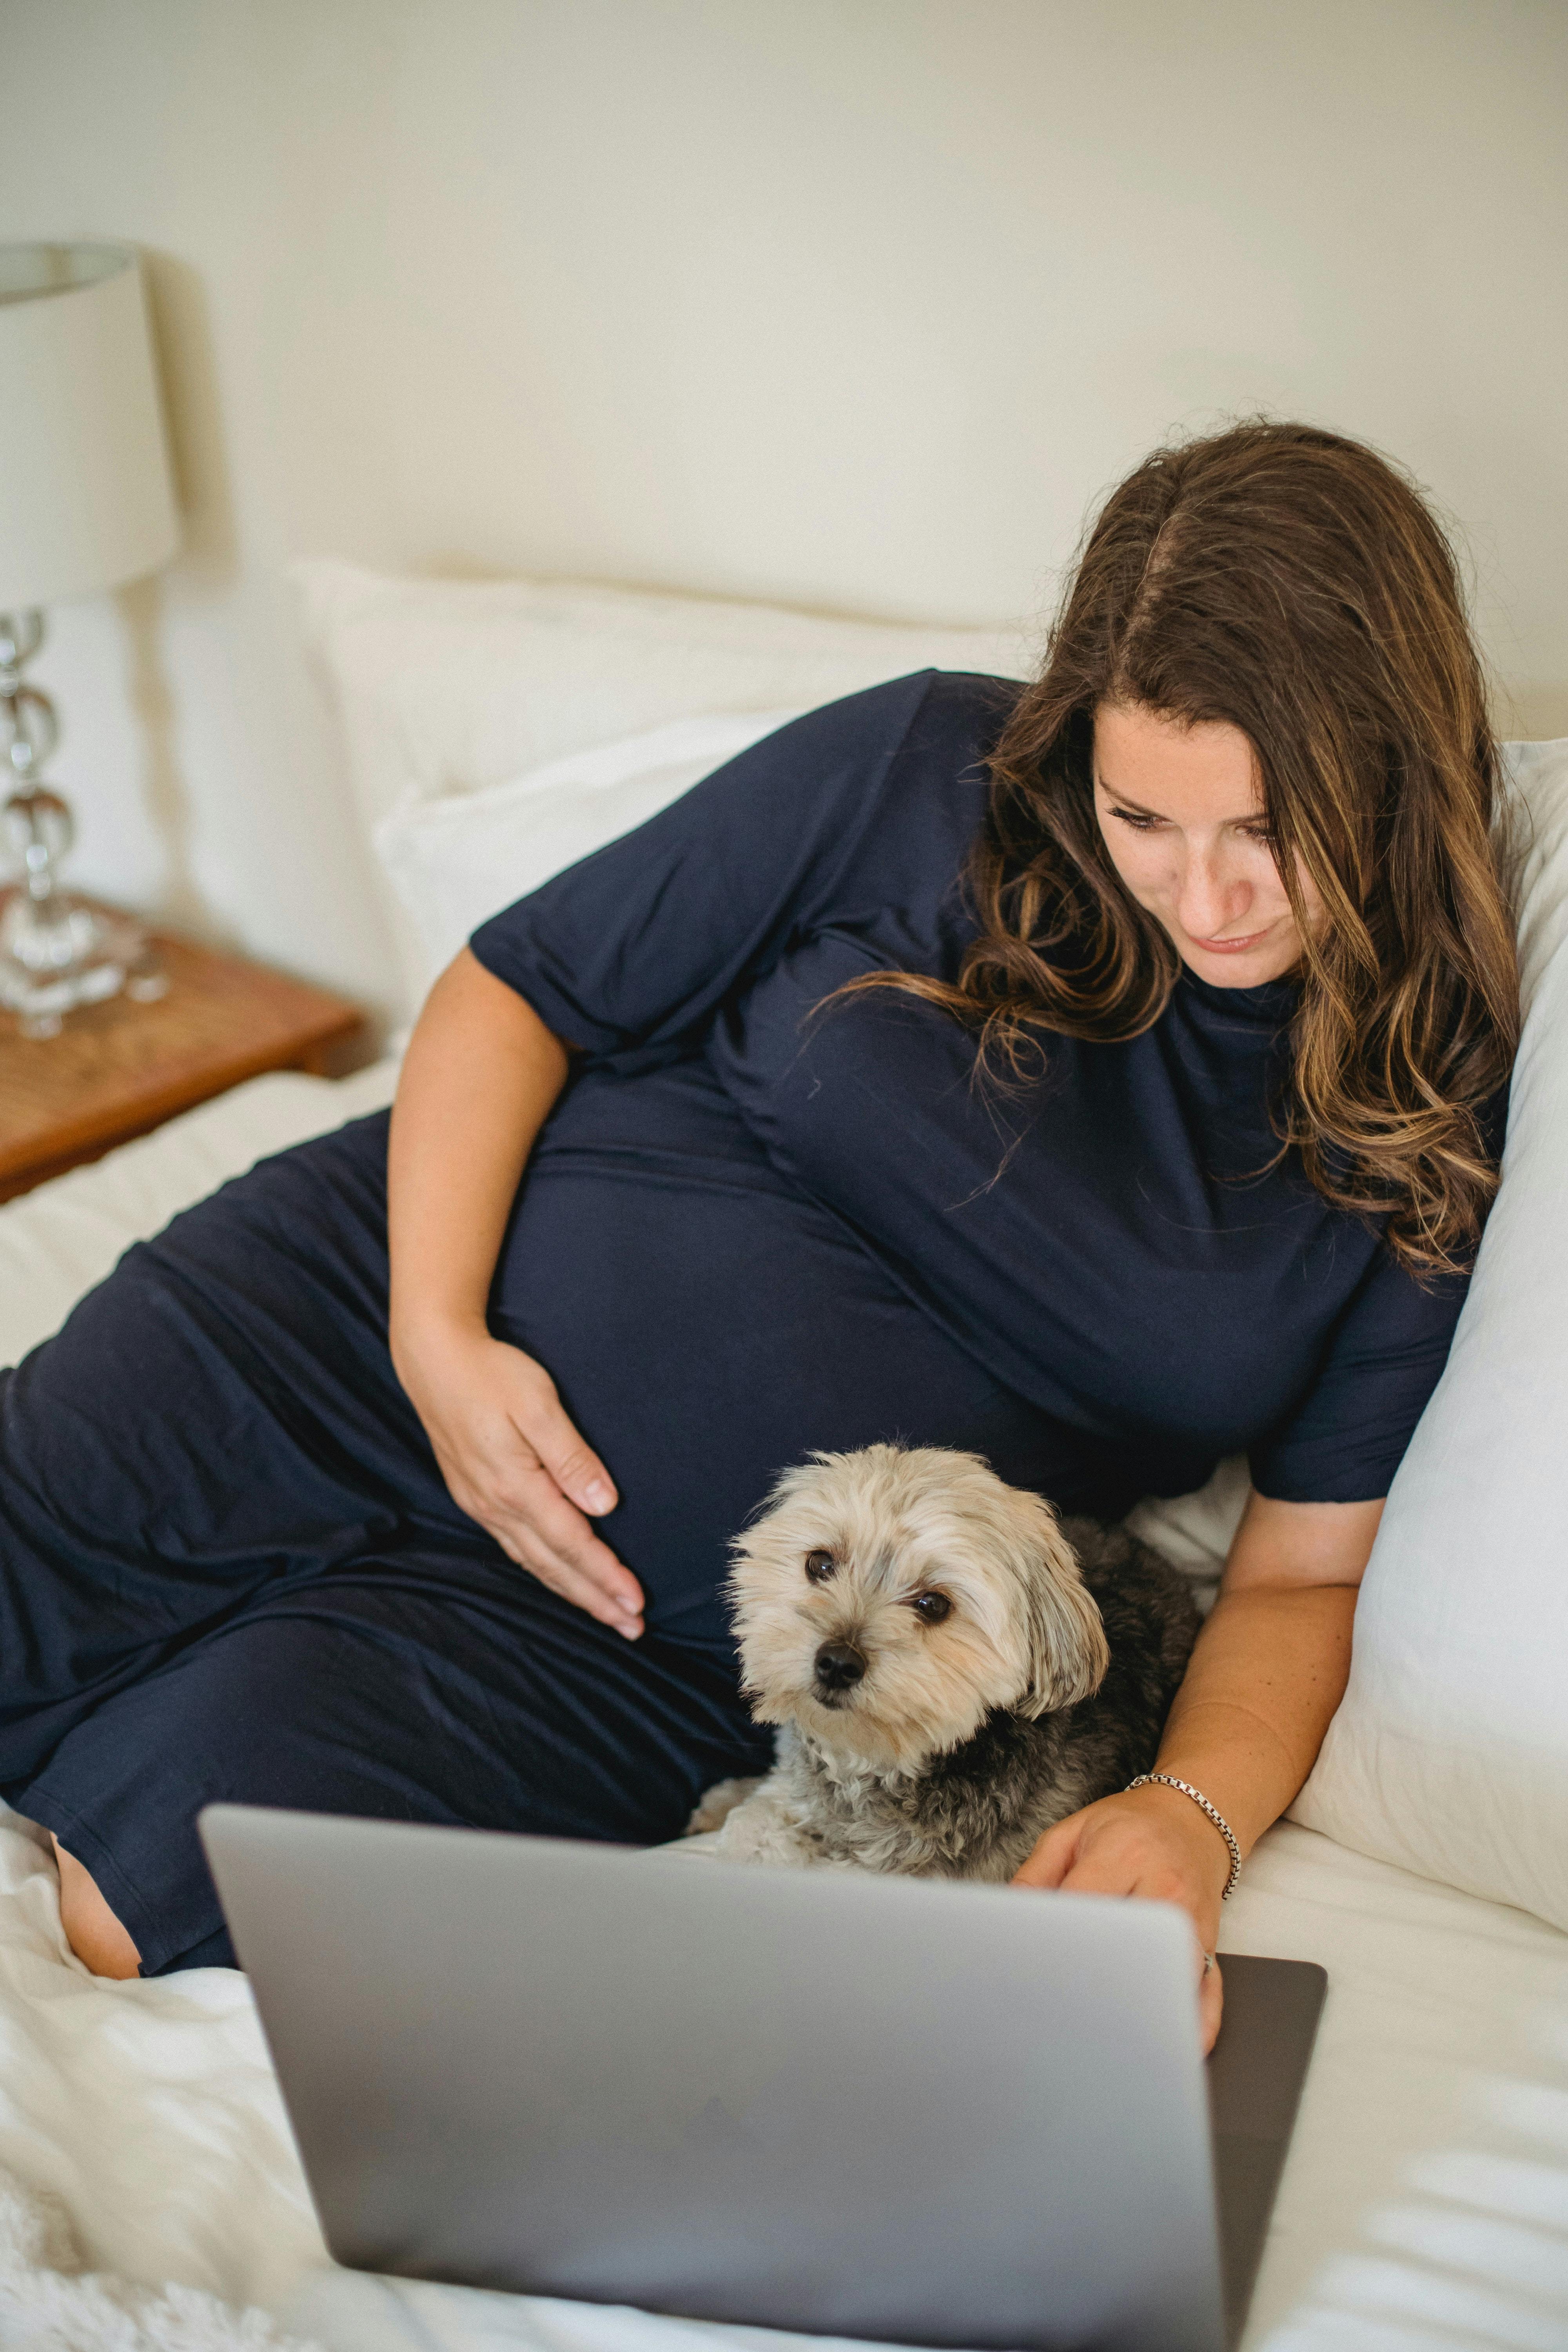 A pregnant woman works on her computer with her yorkie in her arms